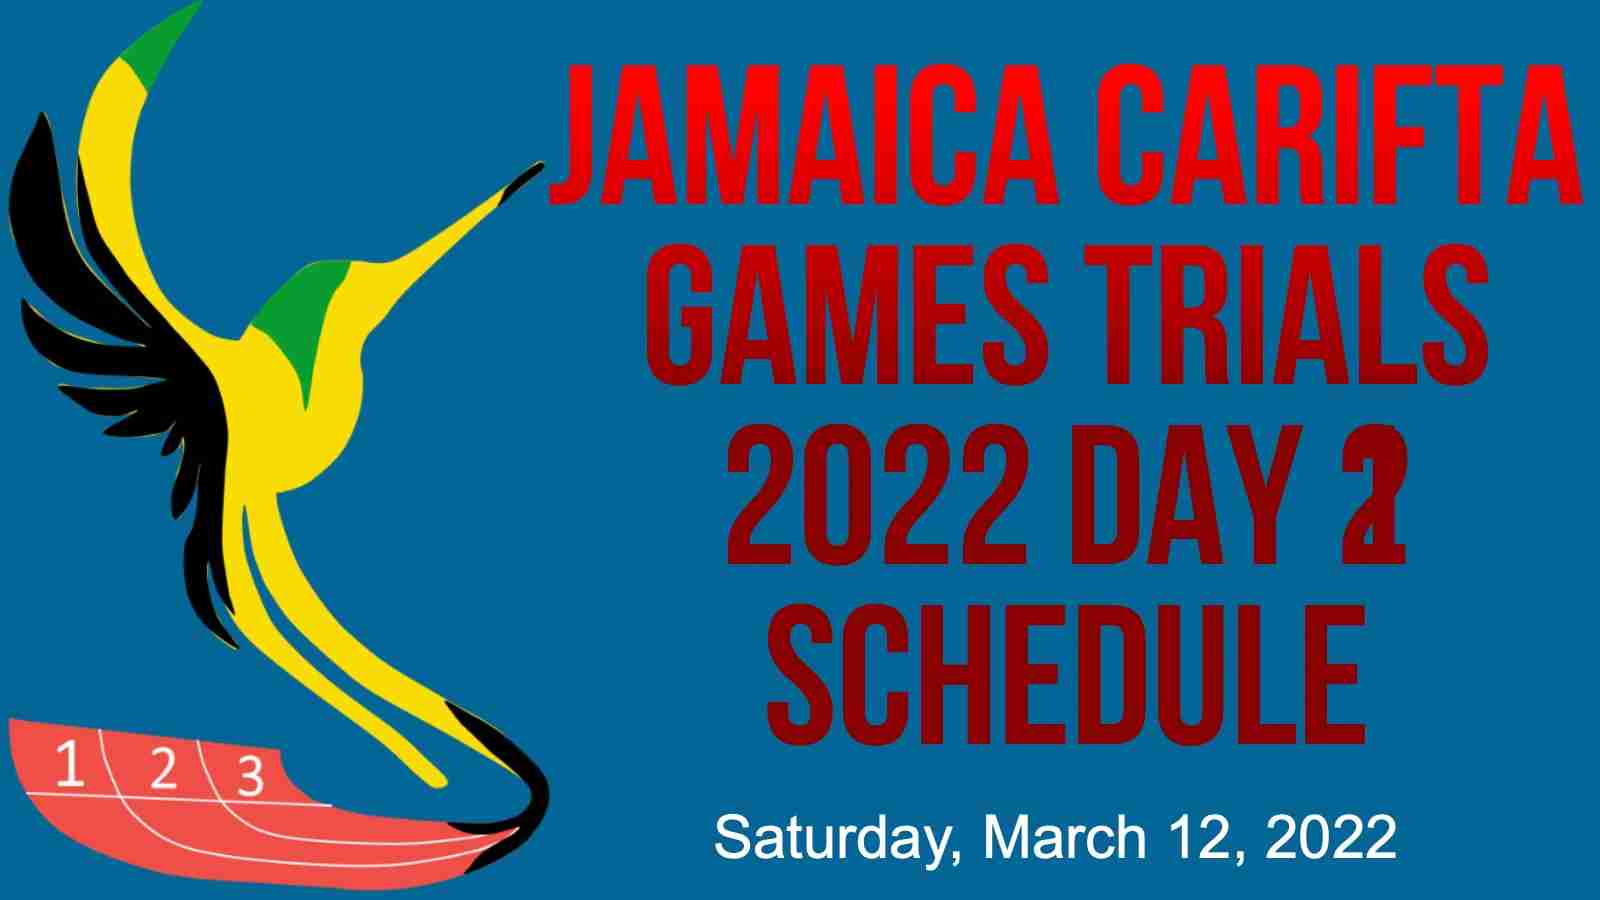 Day 2: How to watch the Jamaica Carifta Games trials 2022